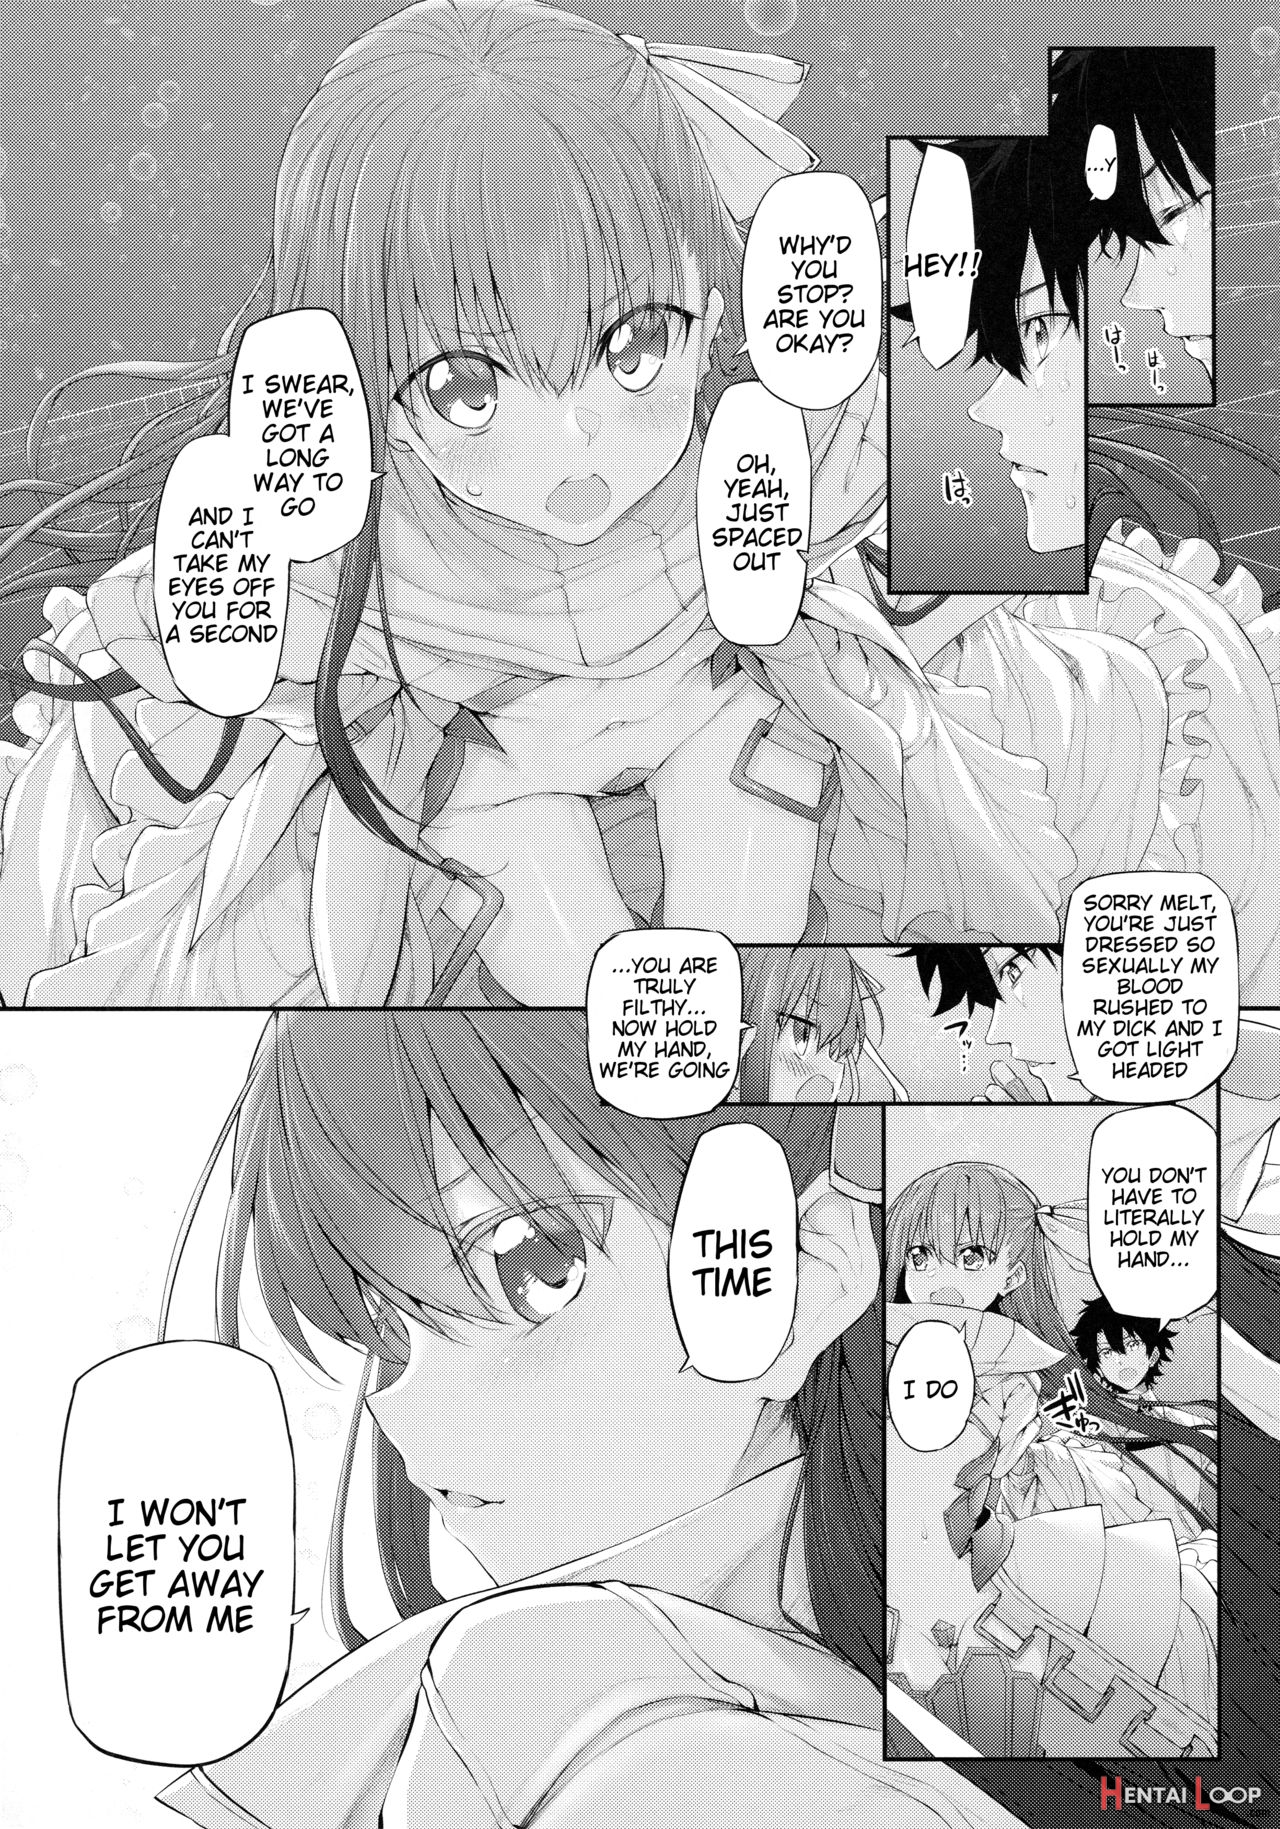 Marked Girls Vol. 15 page 3